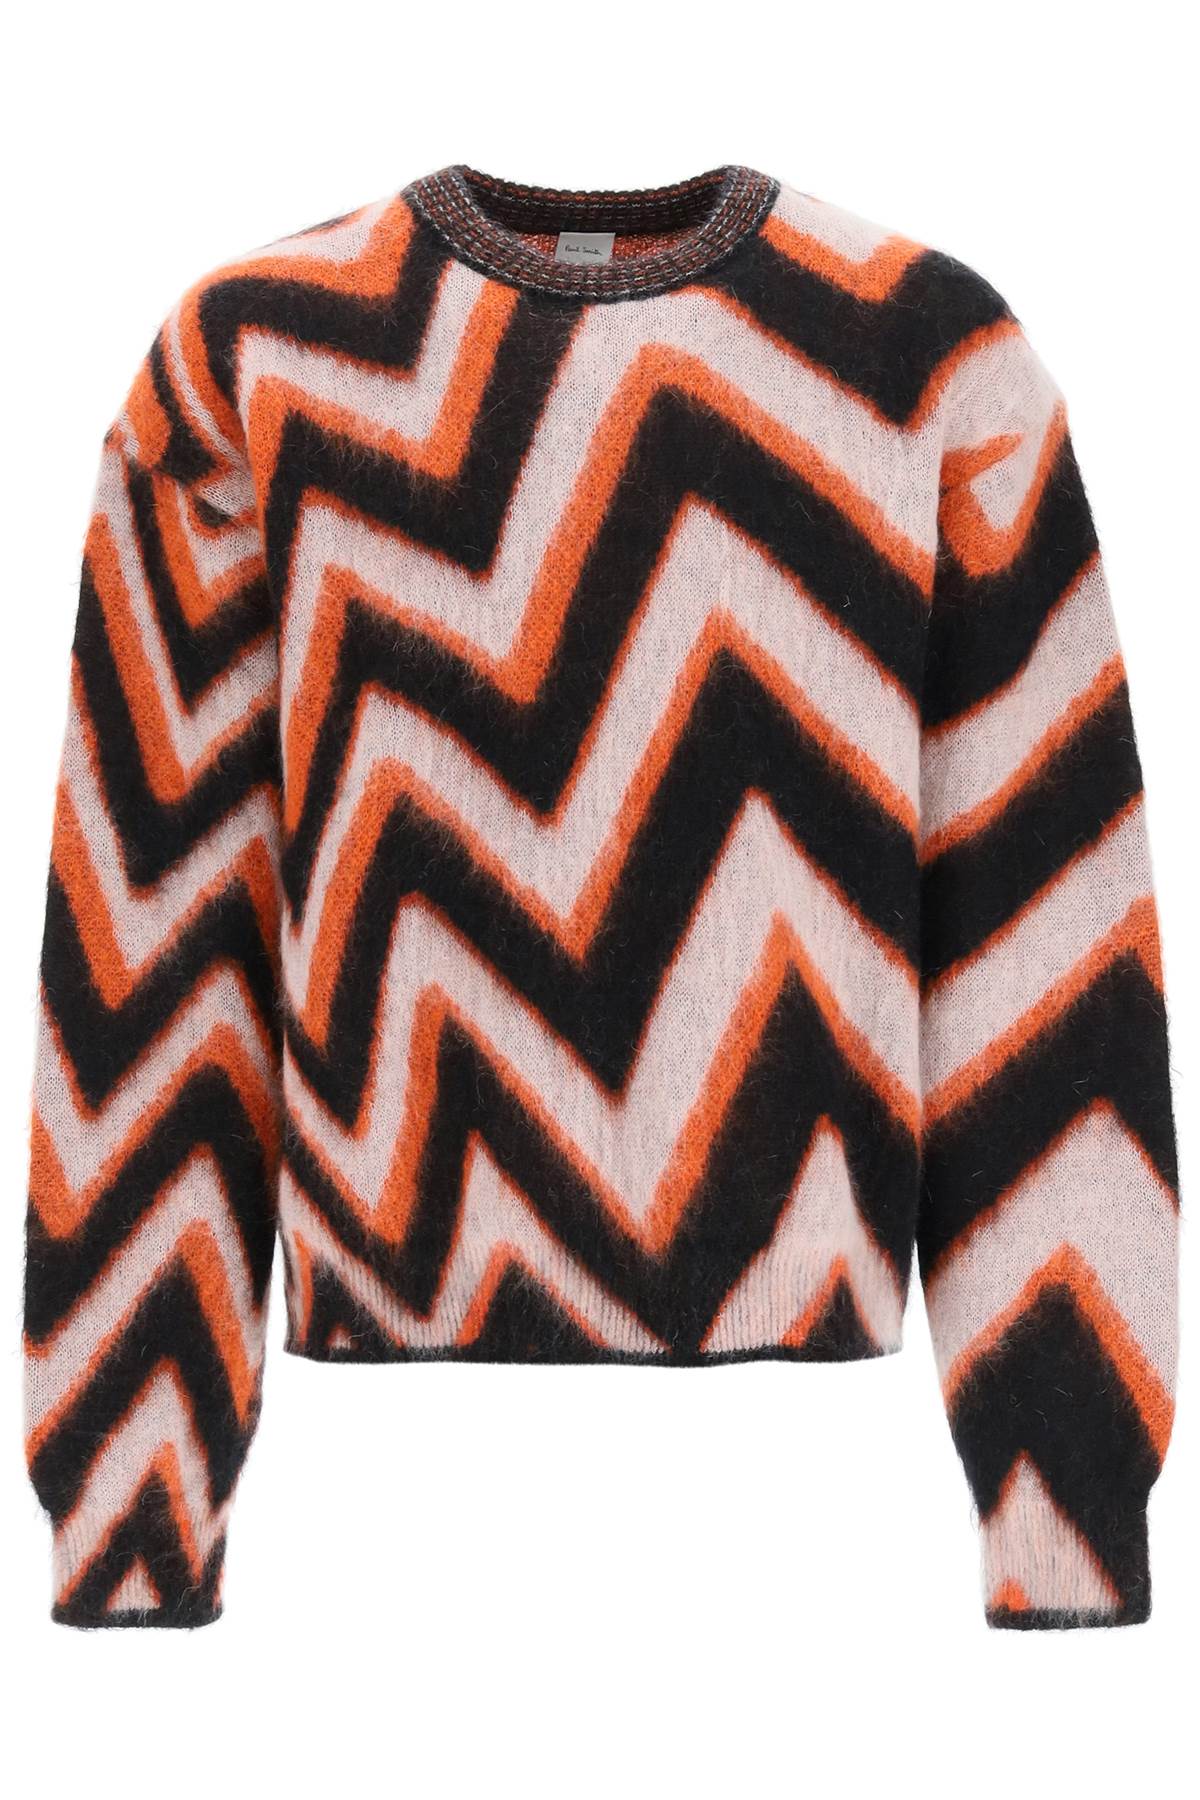 PAUL SMITH ZIGZAG MOHAIR-BLEND SWEATER